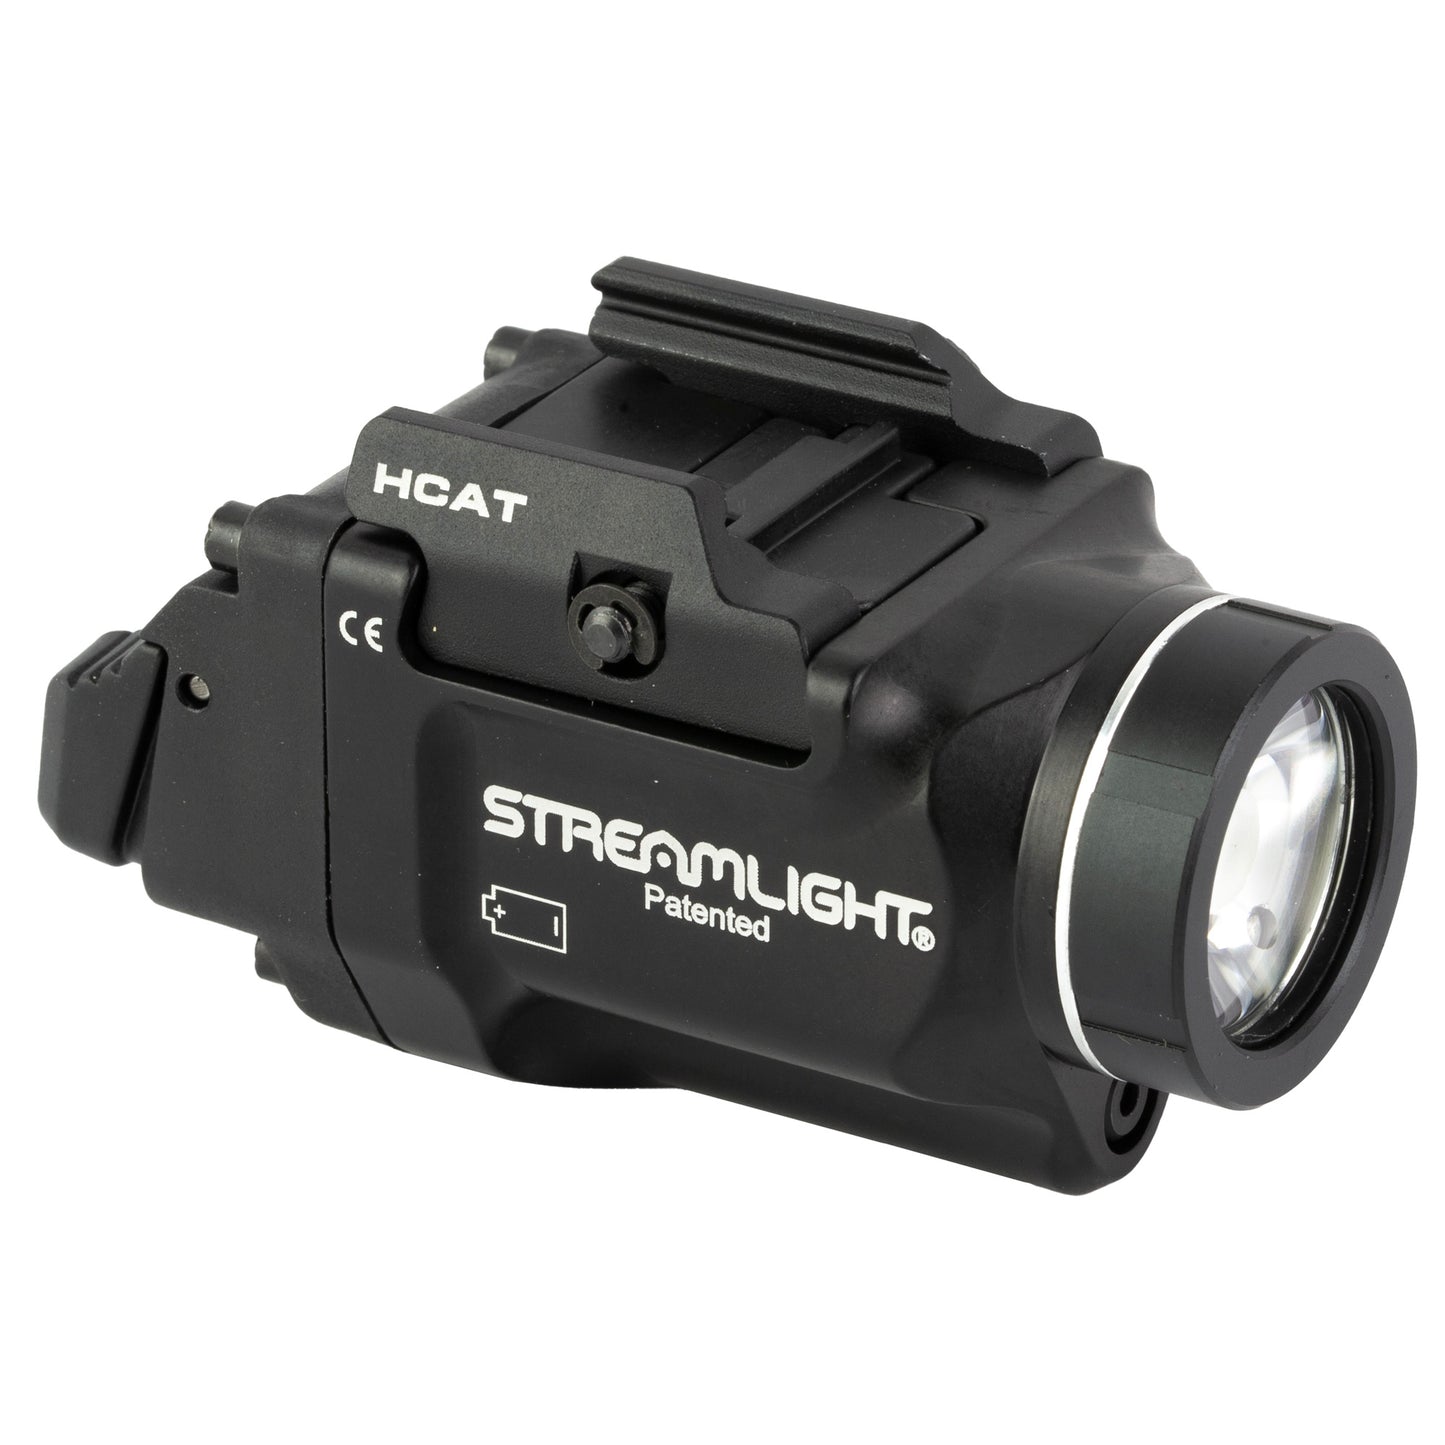 Streamlight, Streamlight TLR-8 G Sub, White LED with Green Laser, Fits Springfield Hellcat, 500 Lumens, Anodized Finish, Black, Includes (1) CR123a Battery, Low and High Switches